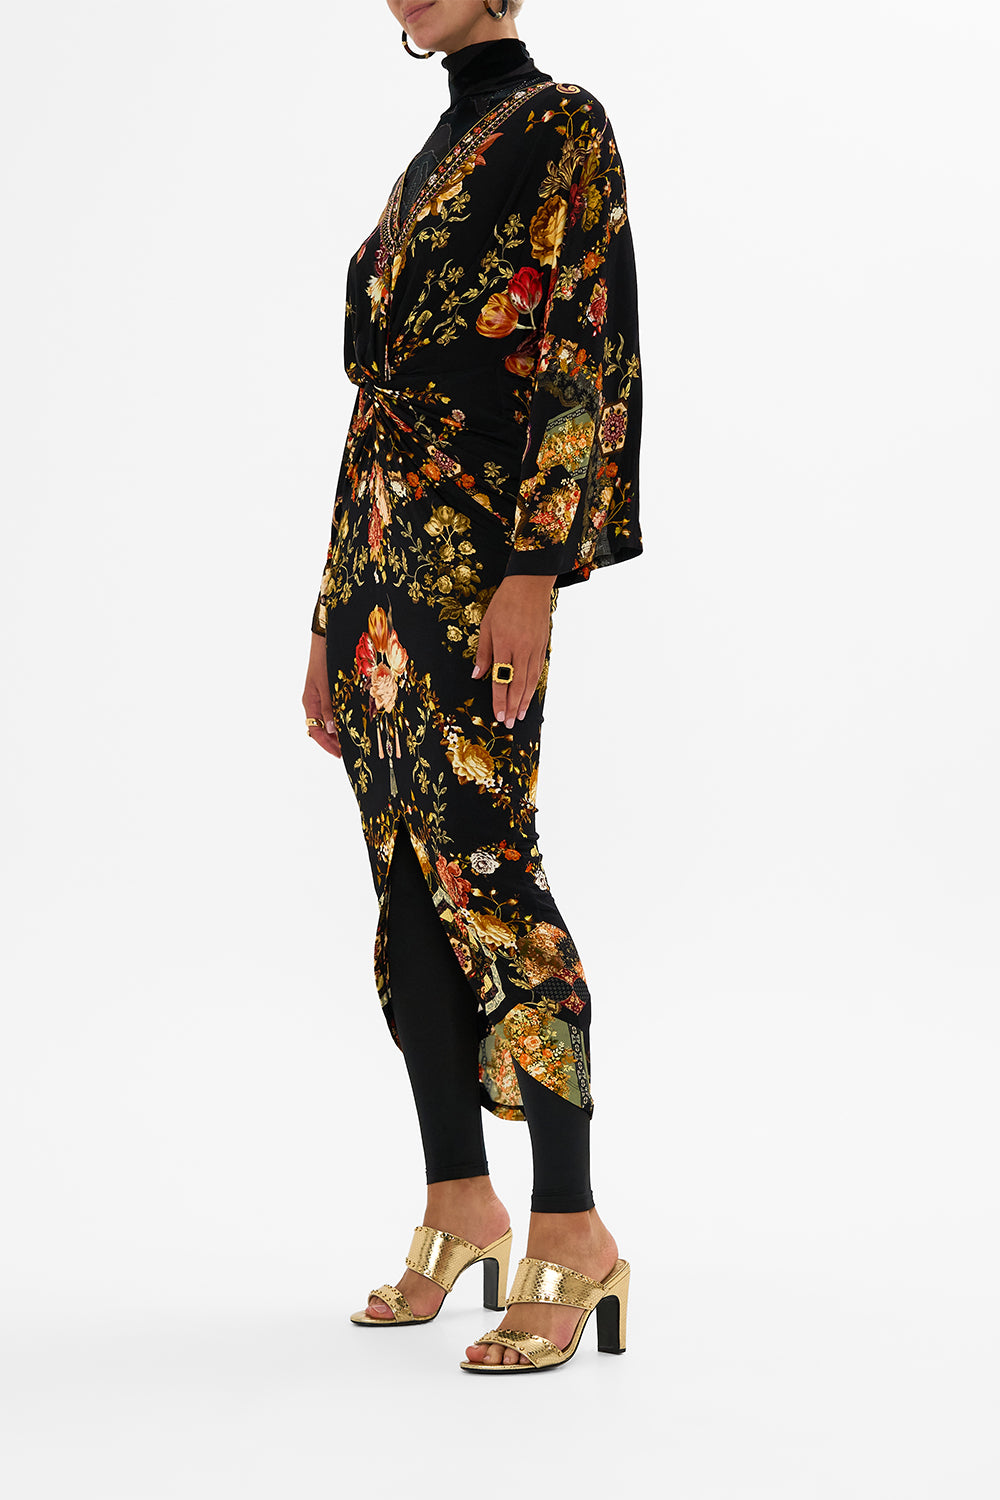 CAMILLA multicolor long split-front twist dress in Stitched In Time print.